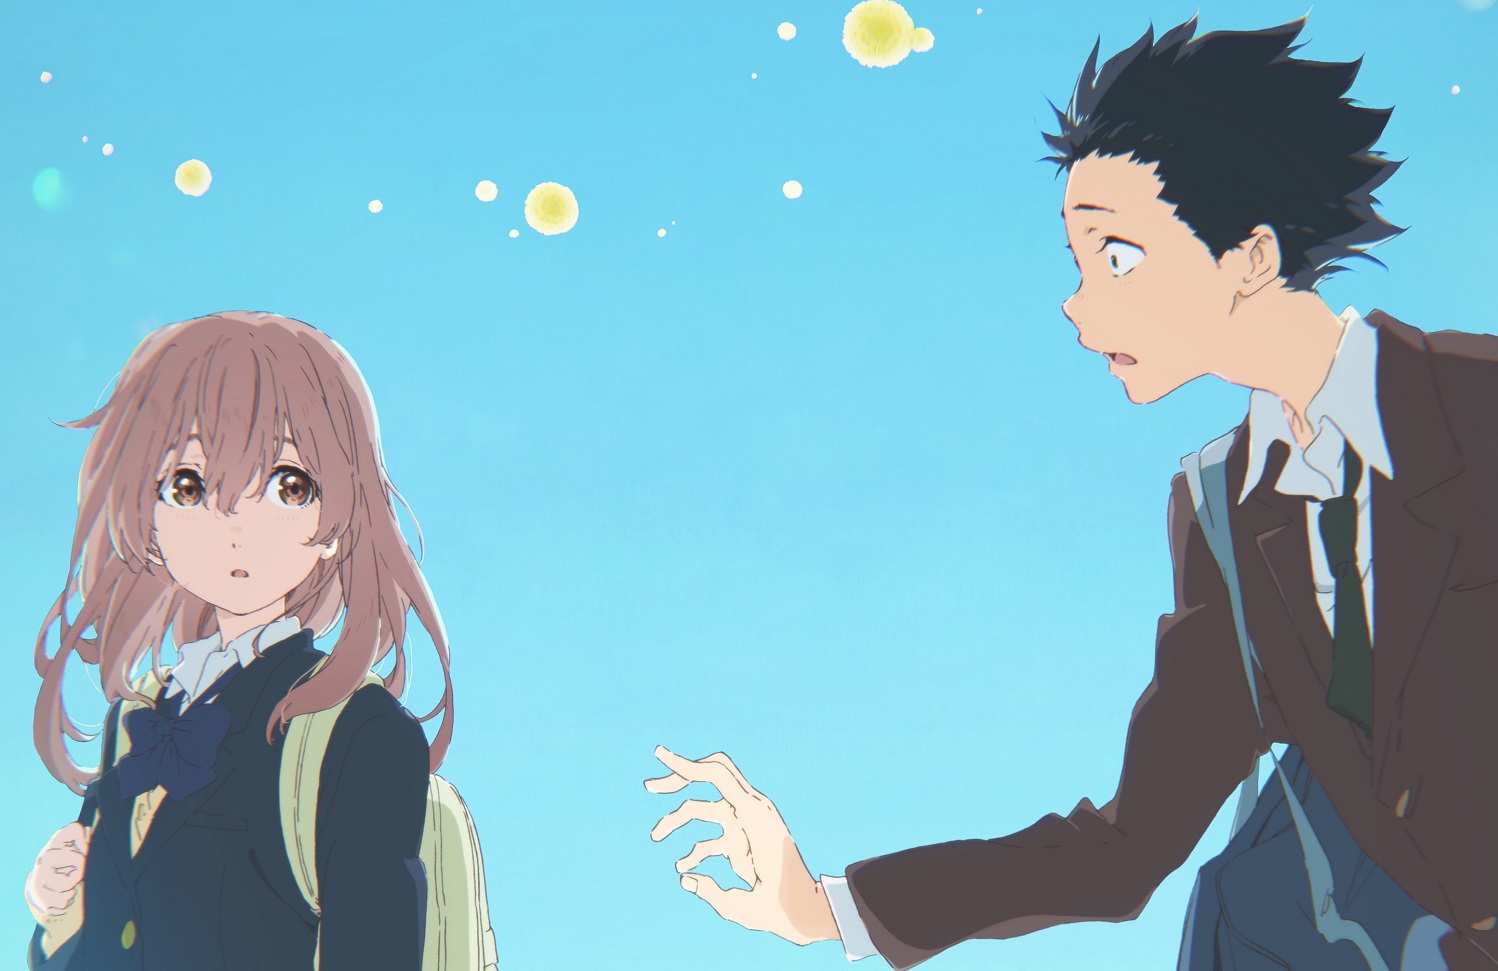 watch a silent voice online free english dubbed